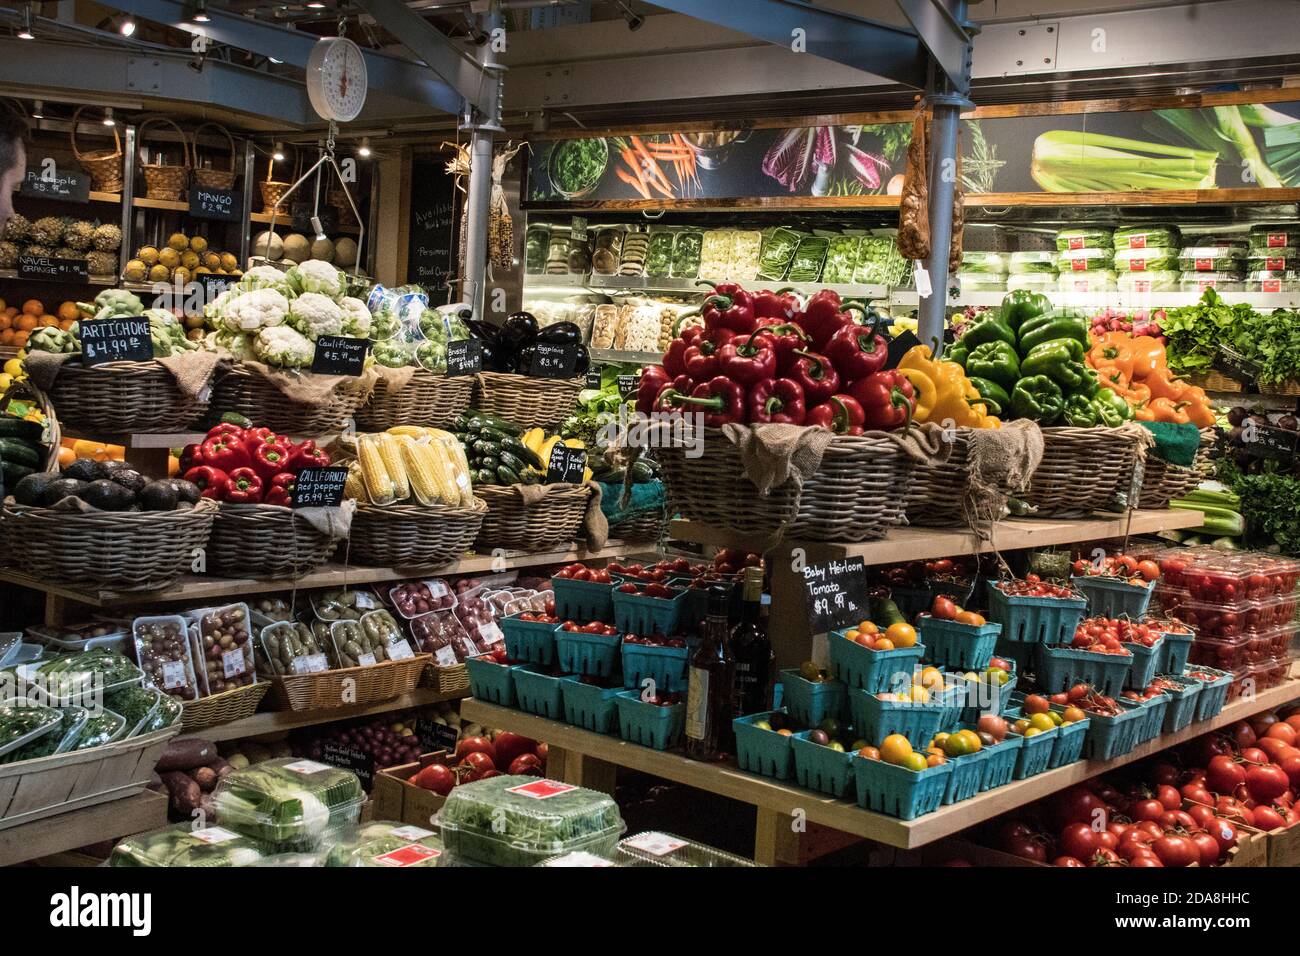 Fruits and vegetables at Grand Central Market at Grand Central Station, Lexington Avenue, Midtown Manhattan, New York City, NY, USA Stock Photo